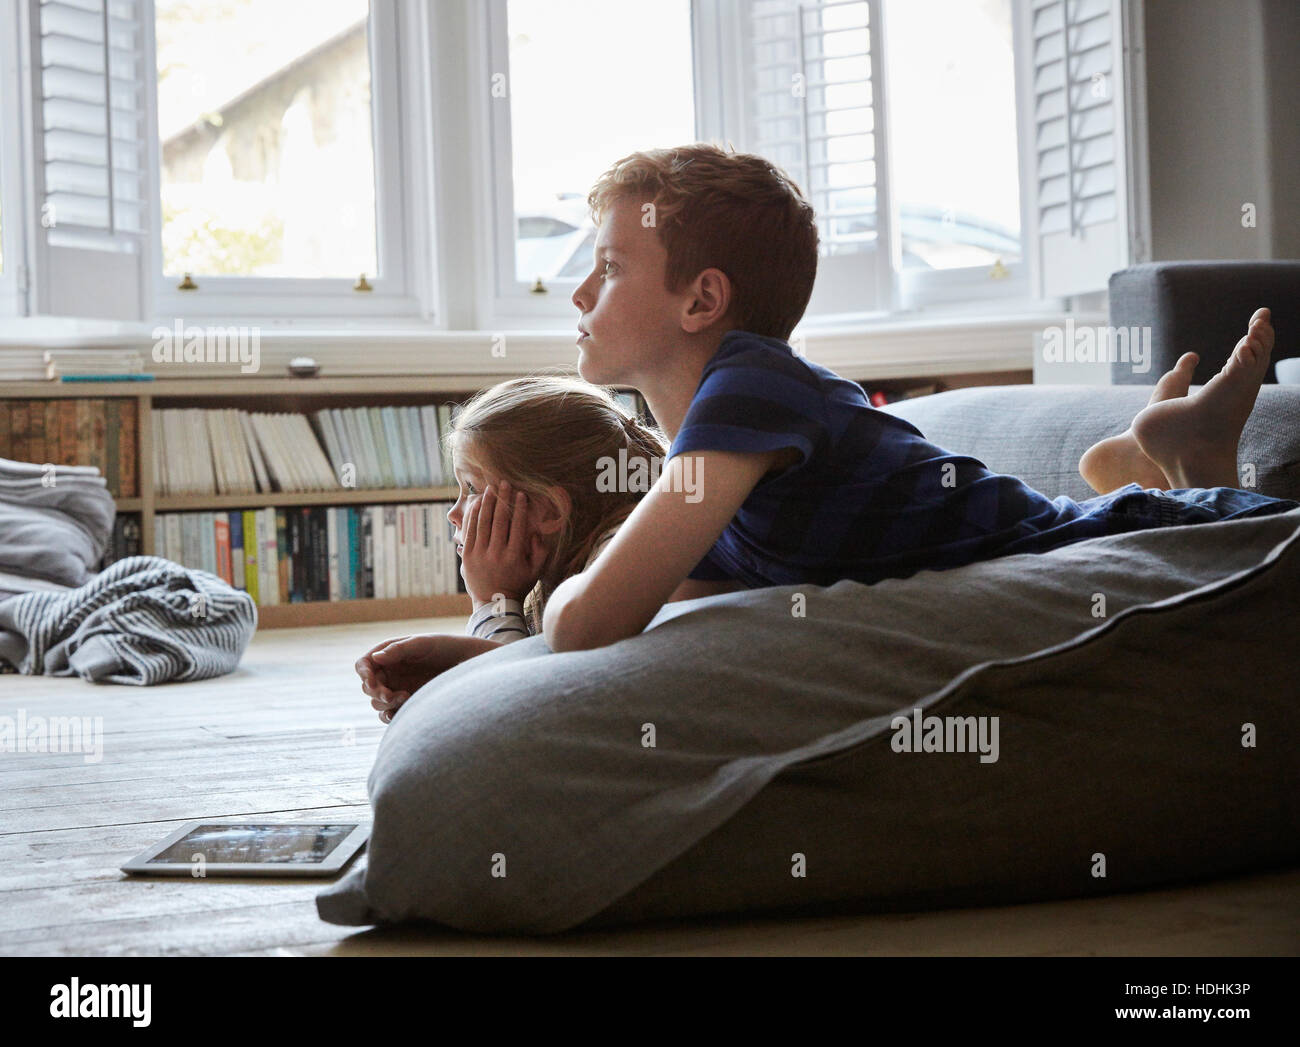 A family home. Two children lying on the floor, watching television. Stock Photo